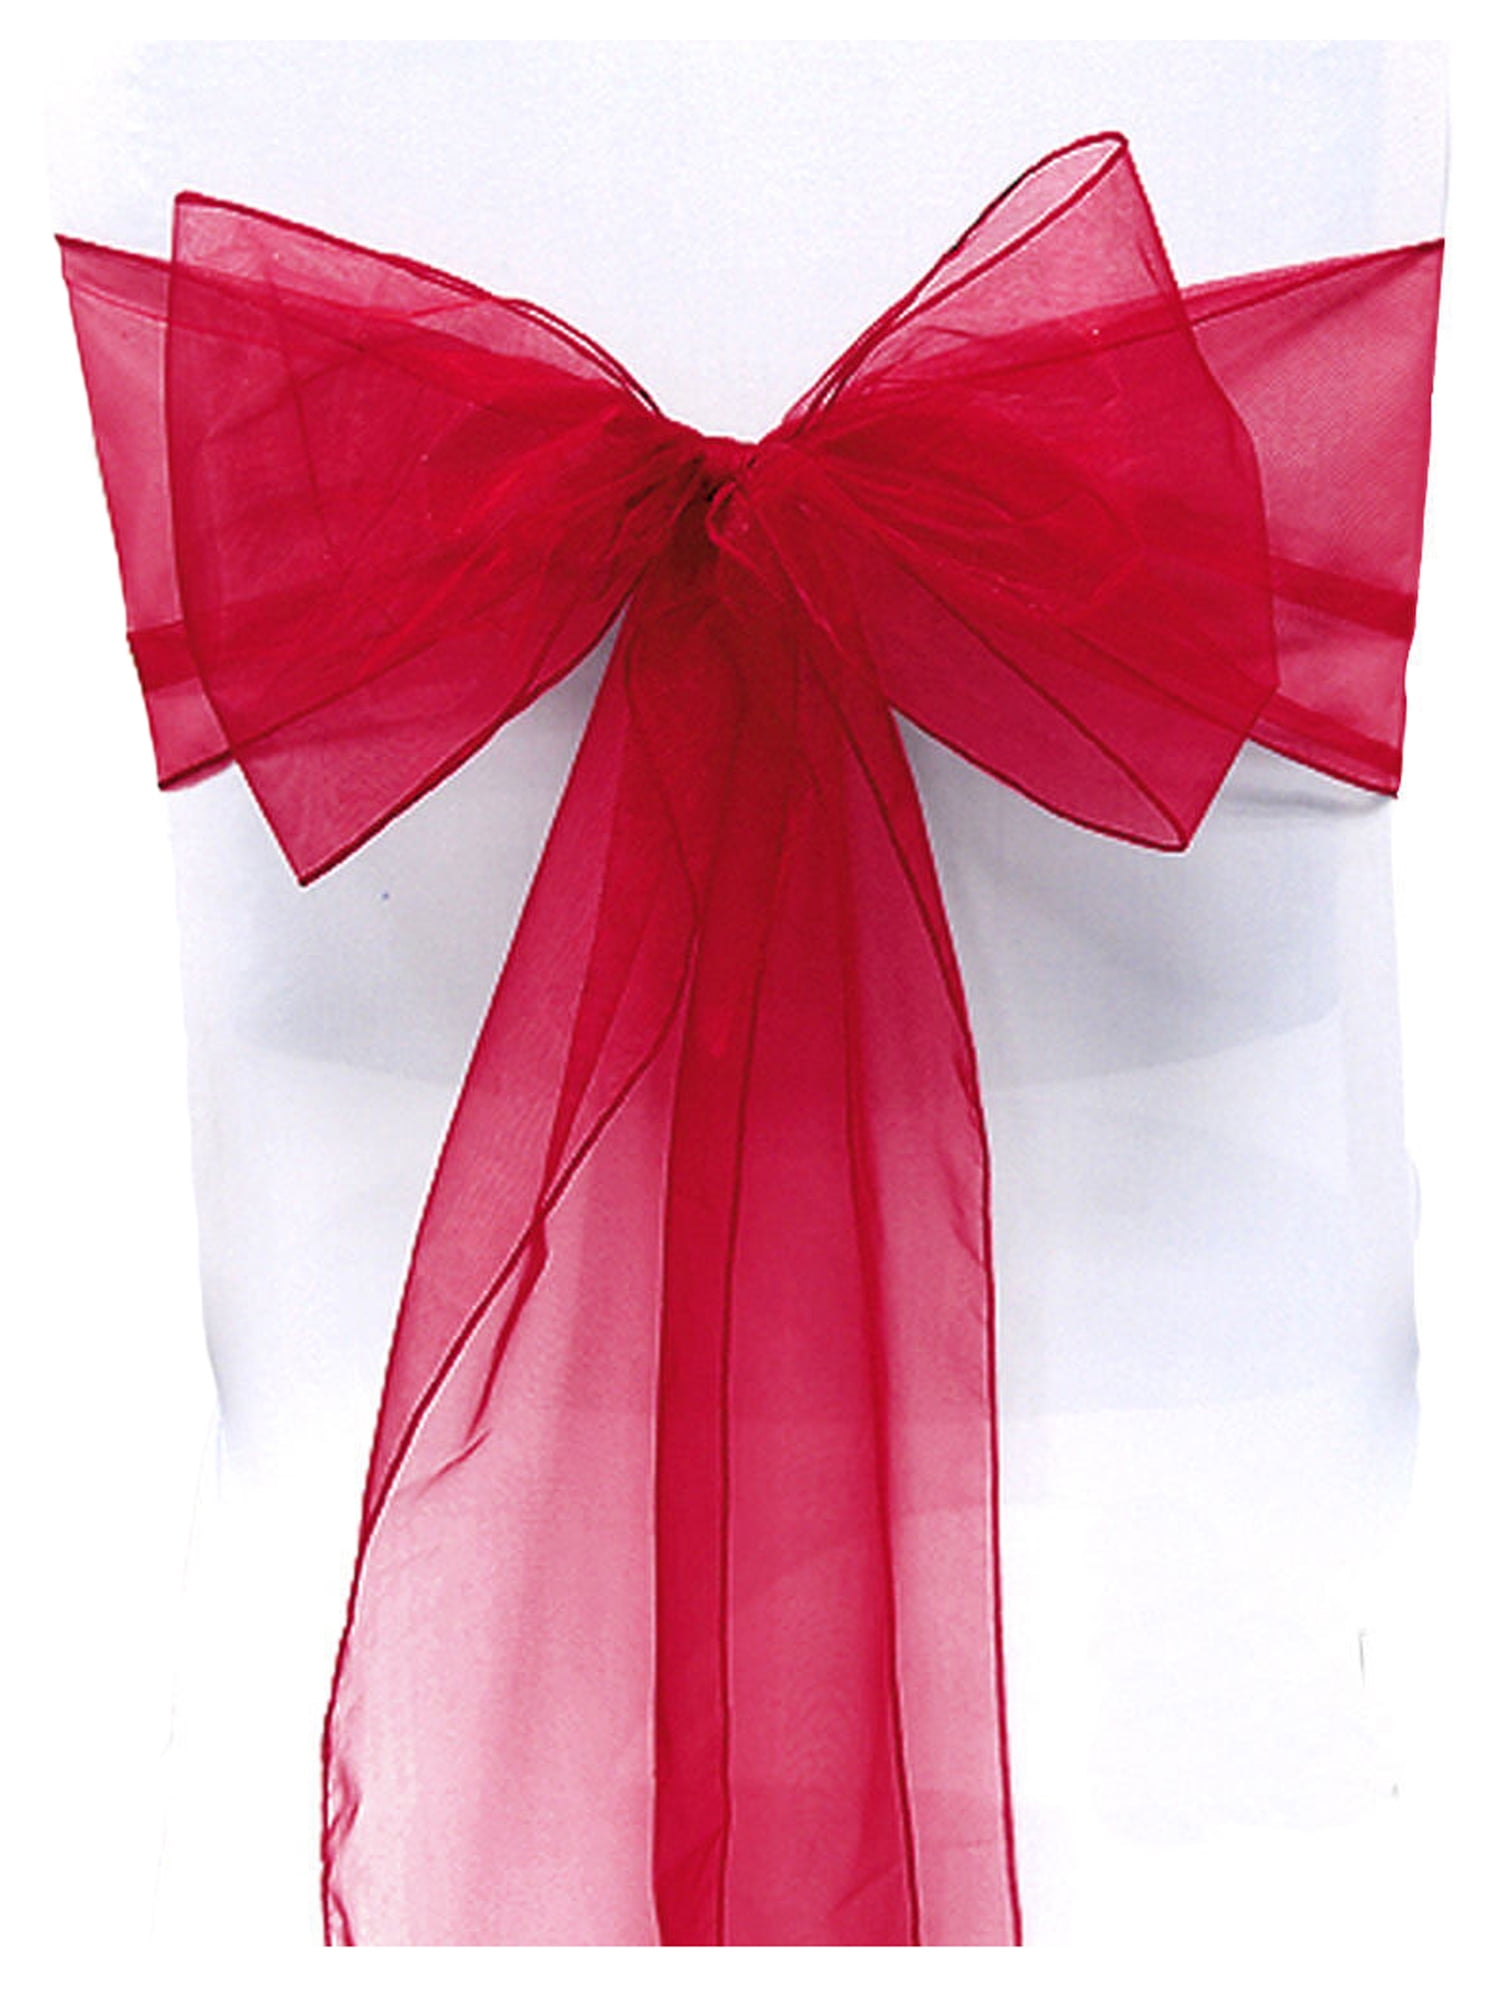 10-100Pcs Organza Sashes Chair Covers Tulle Bows Sash Tie Ribbon  Wedding Party! 